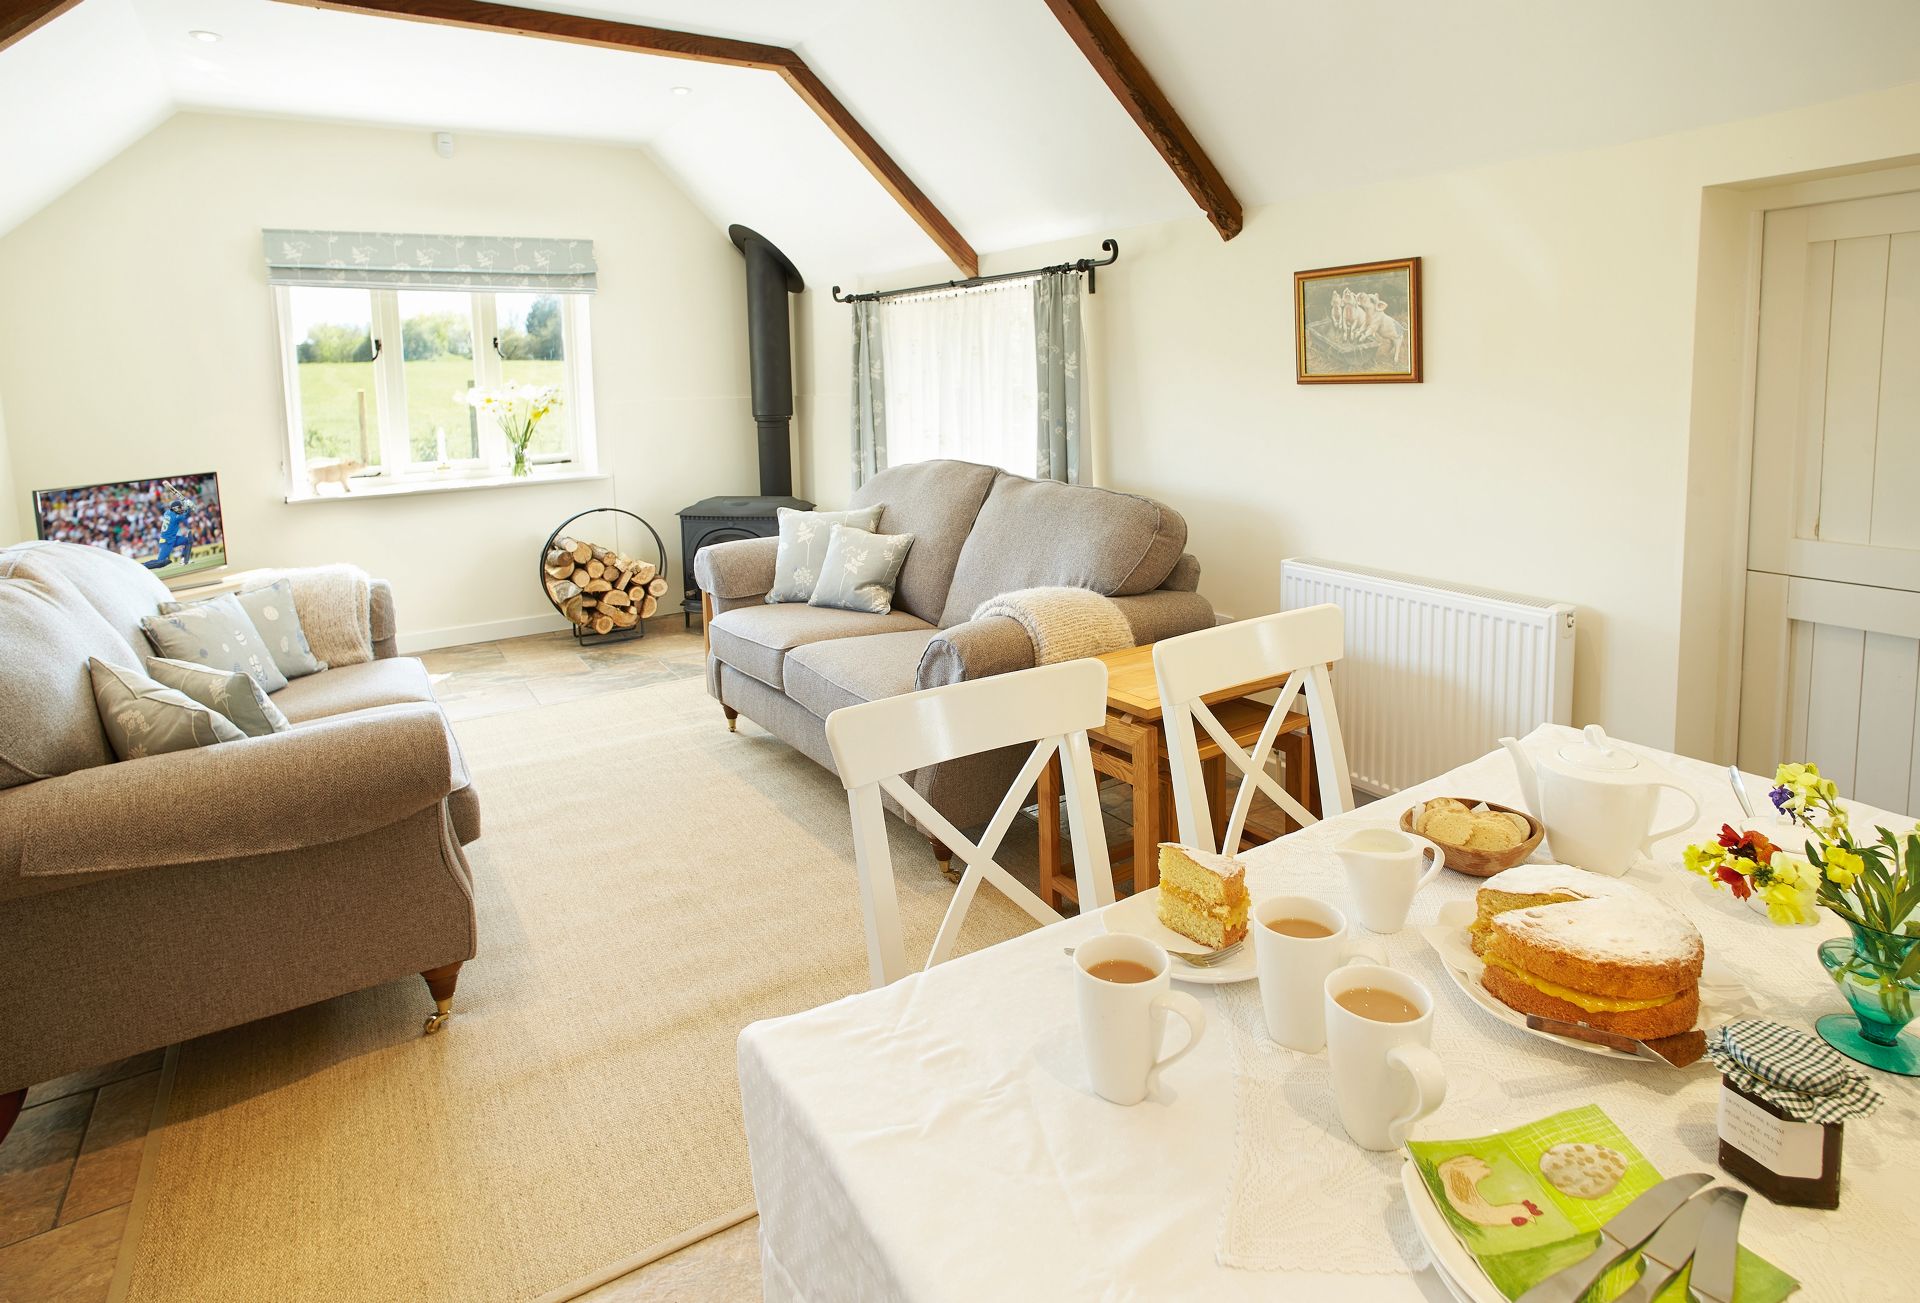 More information about Downclose Piggeries - ideal for a family holiday